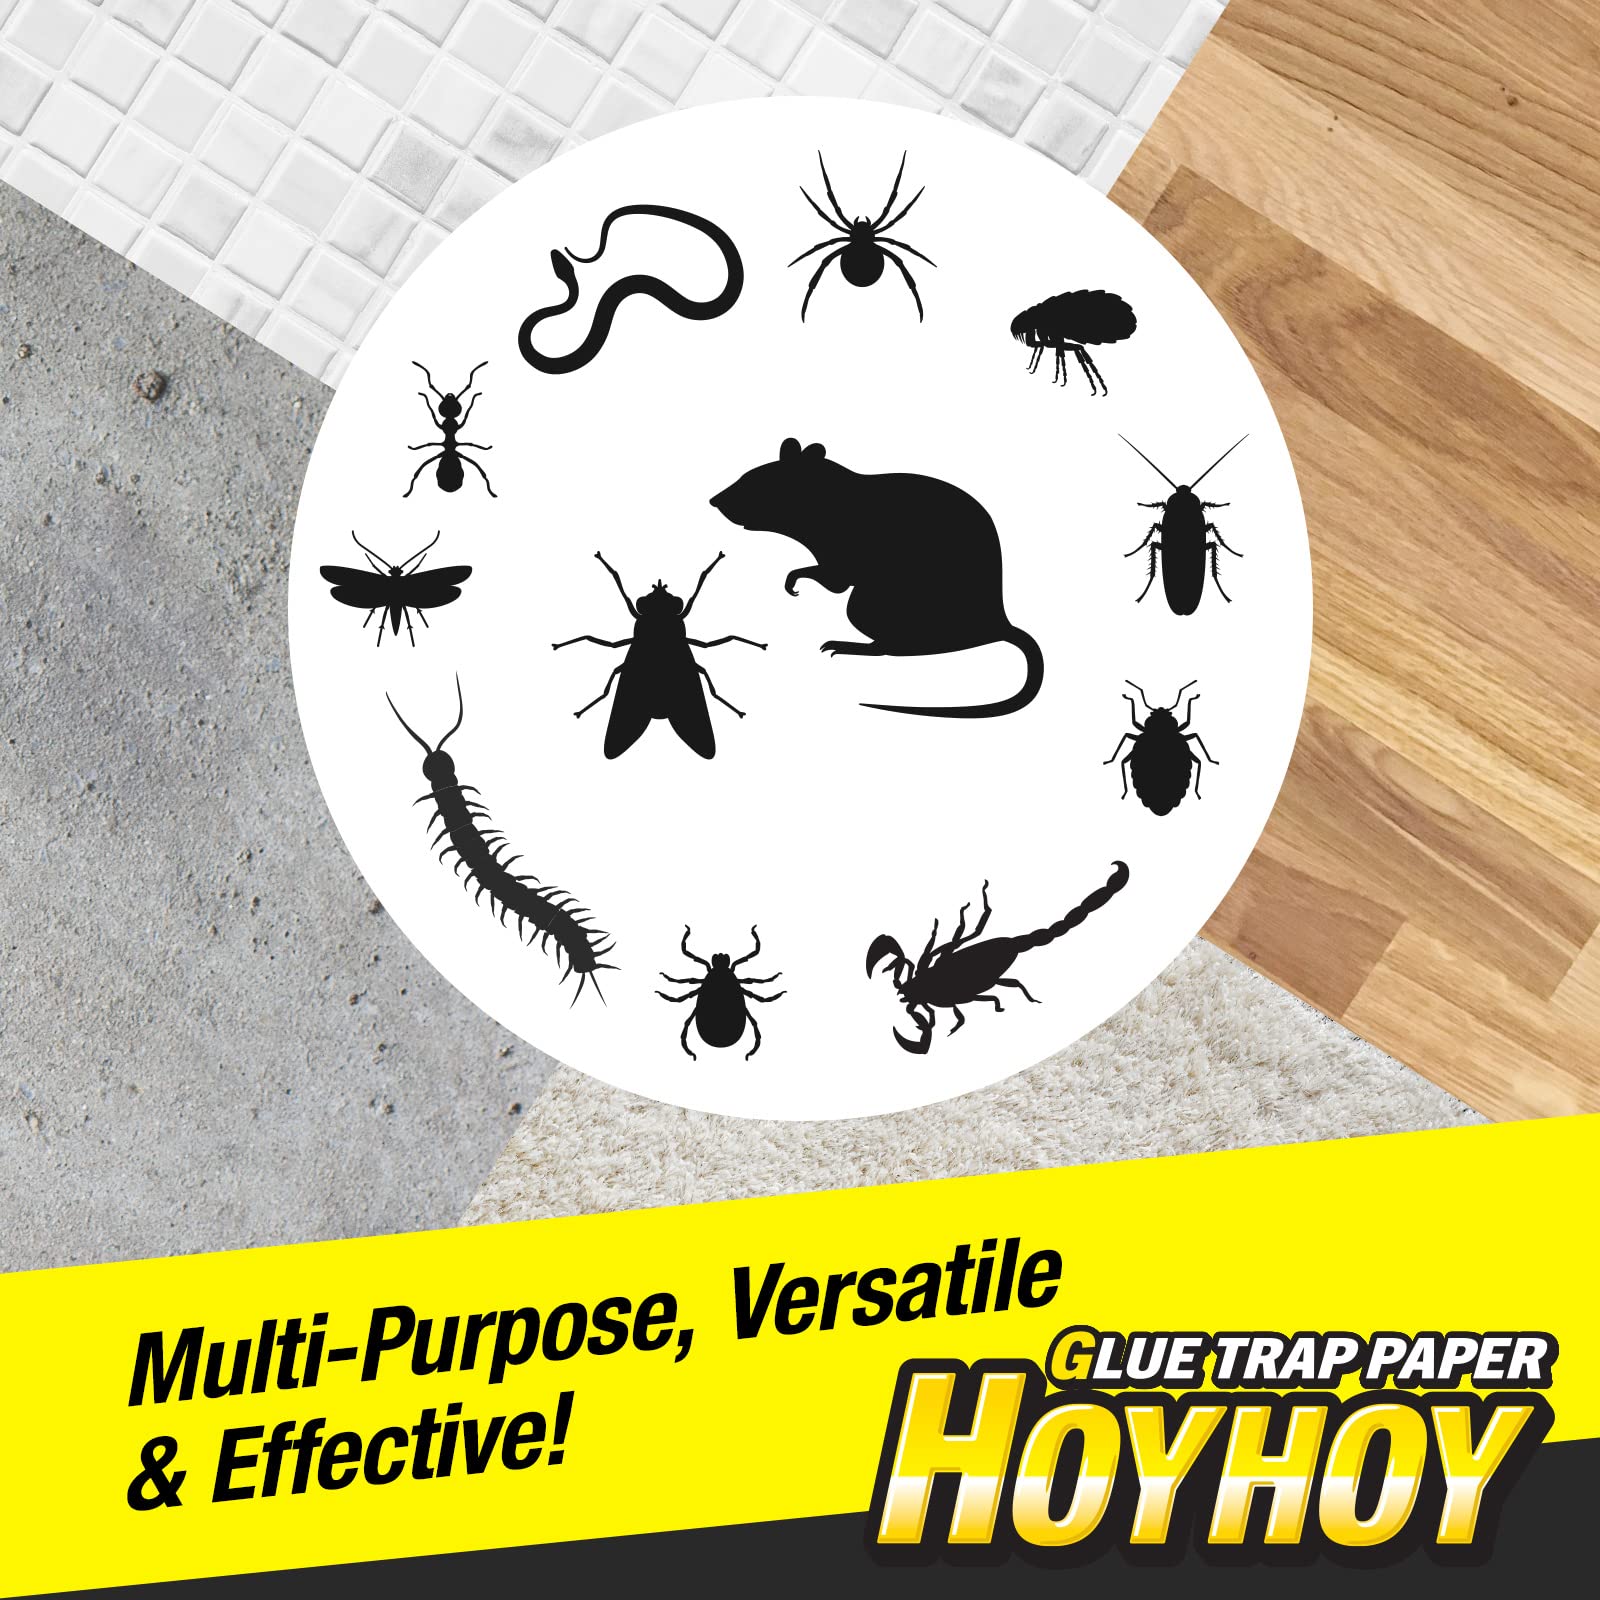 HOY HOY Mice & Flies Glue Trap Paper - 50 Traps [1 Pack] Ready-to-Use Super Strong Glue Multi-Purpose Pest Rodent Killer Trap, Gnat Moth Insects Spider Crickets Roach Rat Snake Lizard, Made in Japan